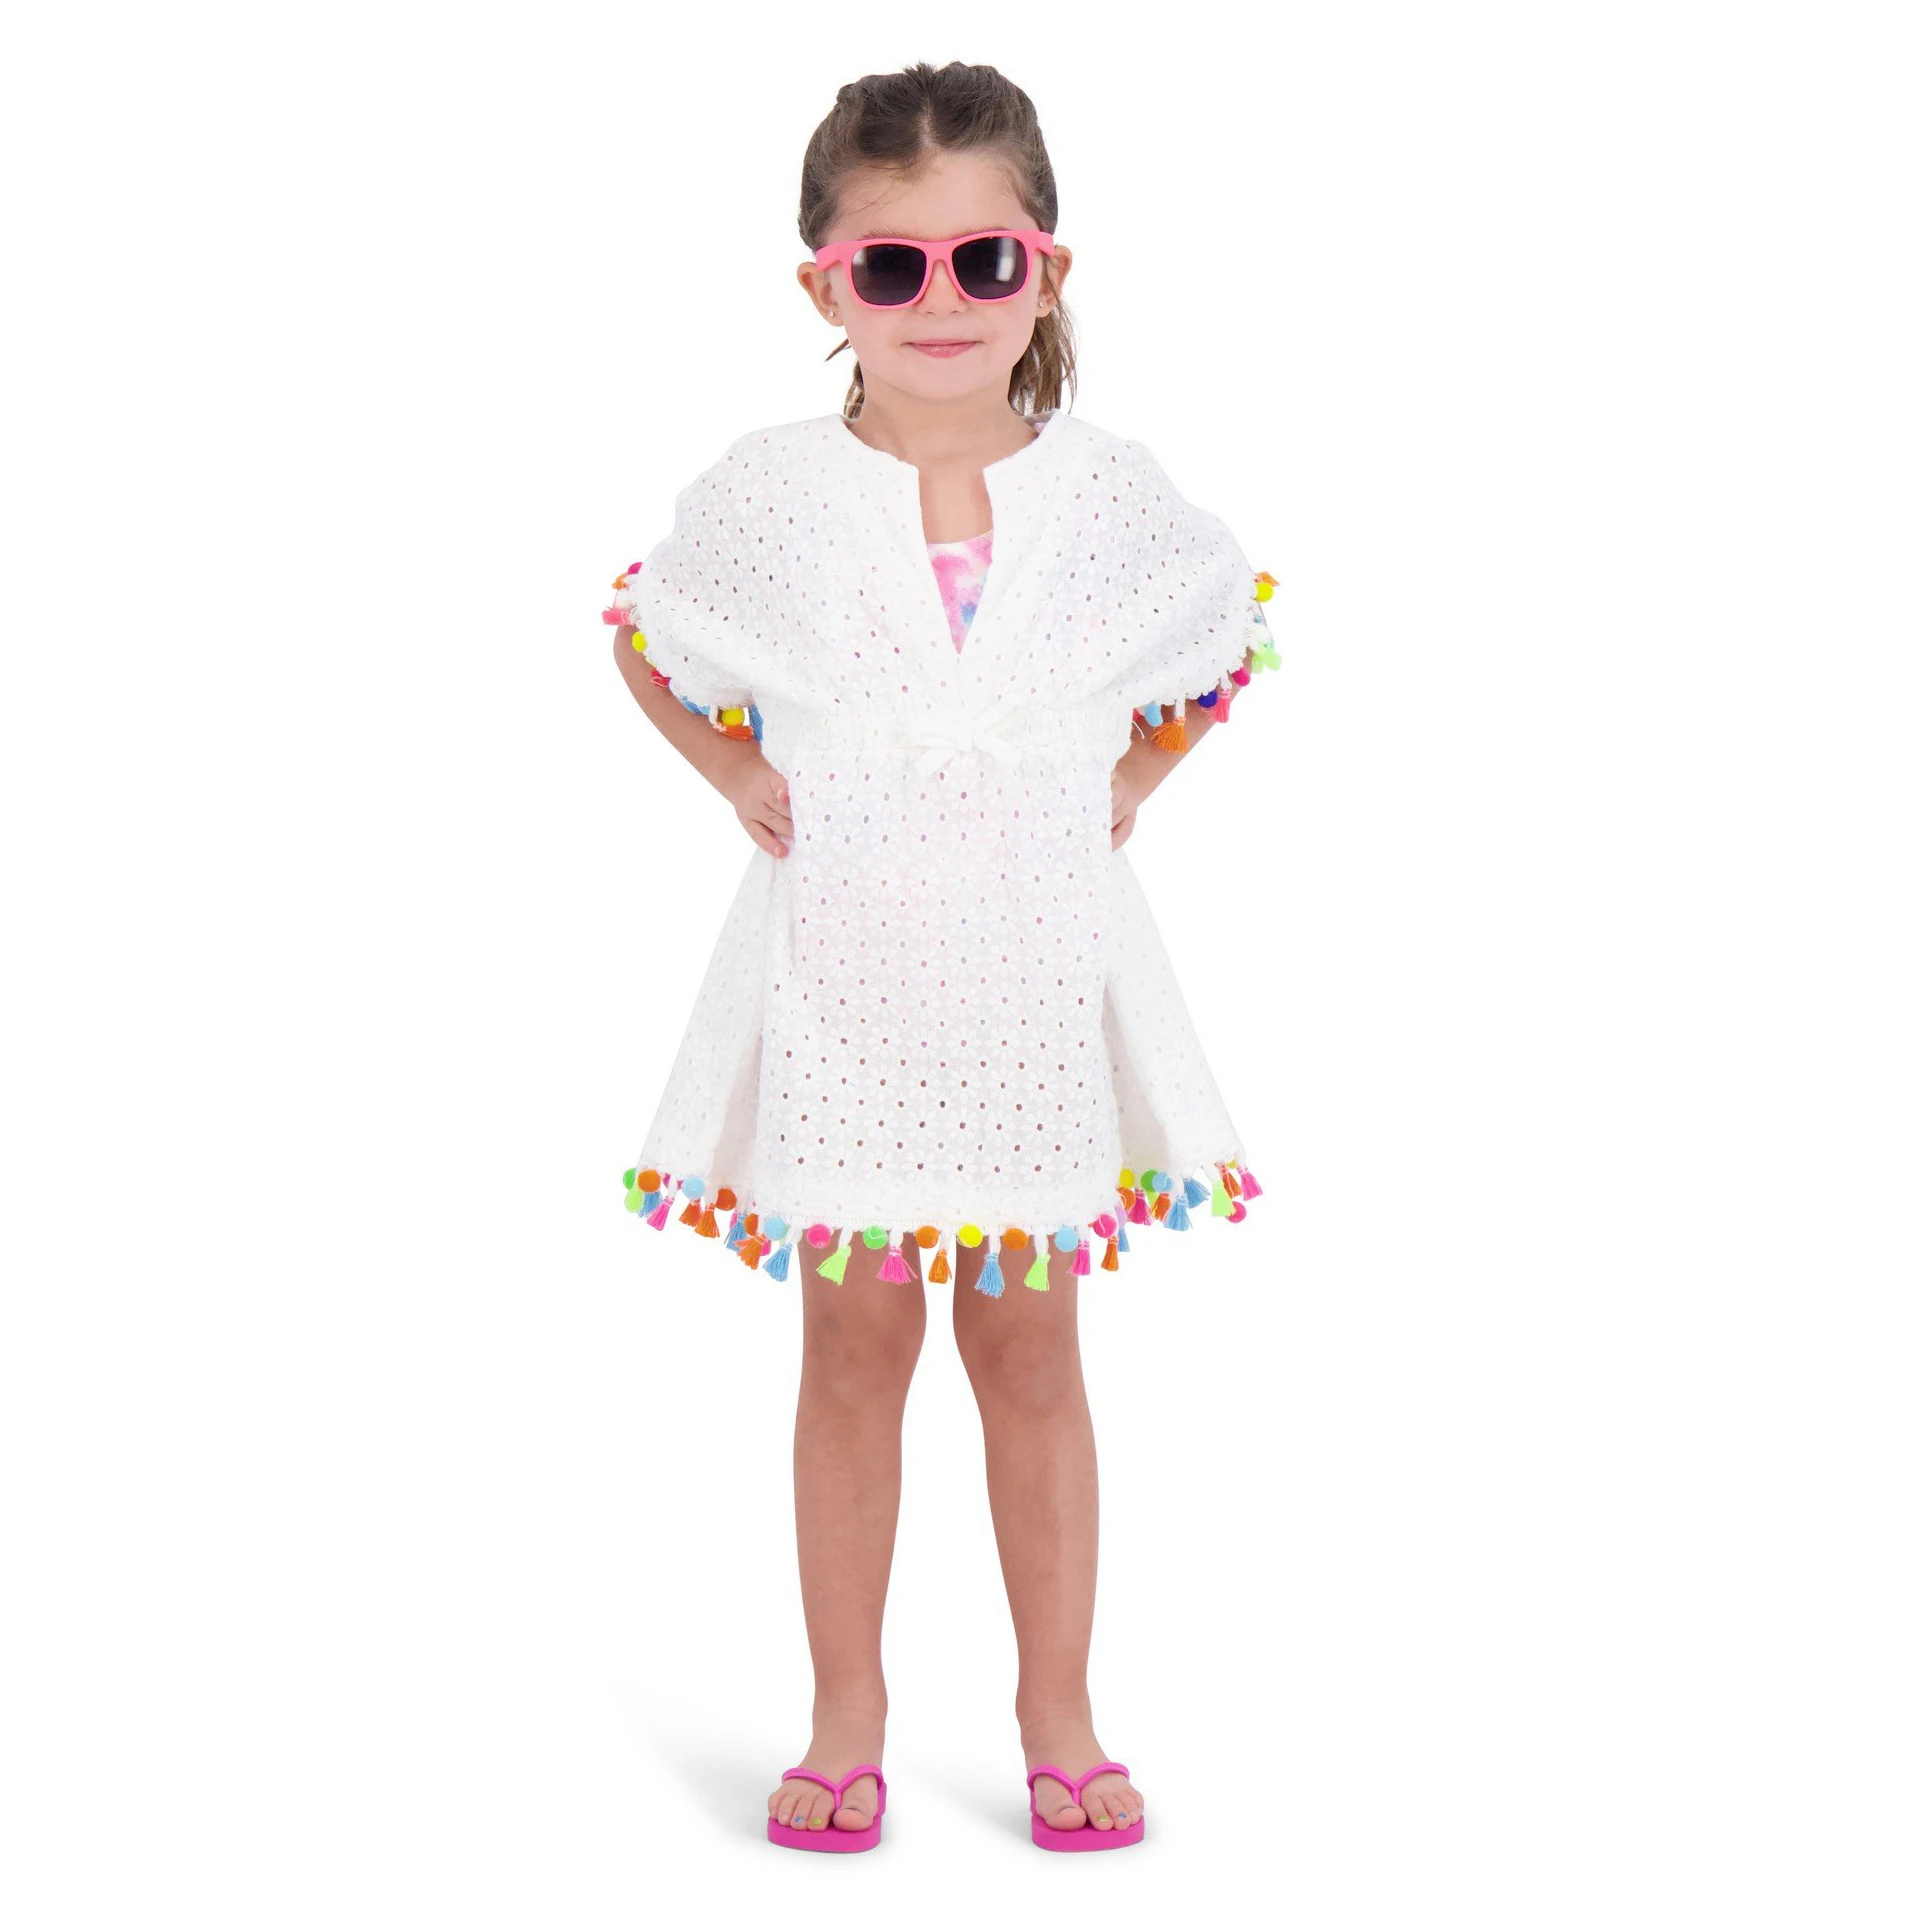 Guangzhou brand toddler girls dresses 6 to 14 years cotton eyelet korean dress summer with colorful tassel at bottom and cuff